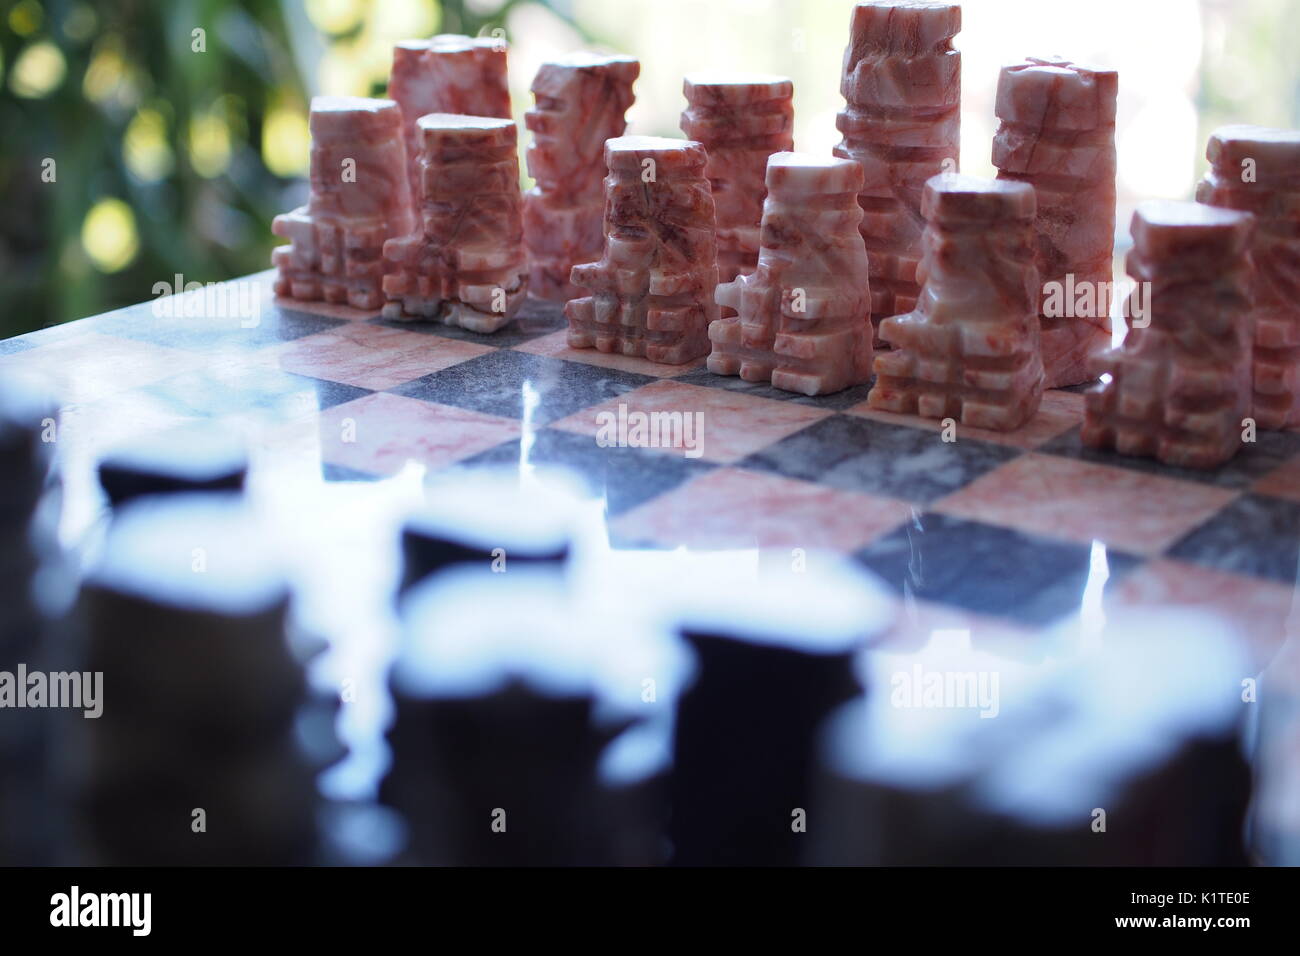 Marble chess pieces (pink and black) face each other across the chessboard. Stock Photo